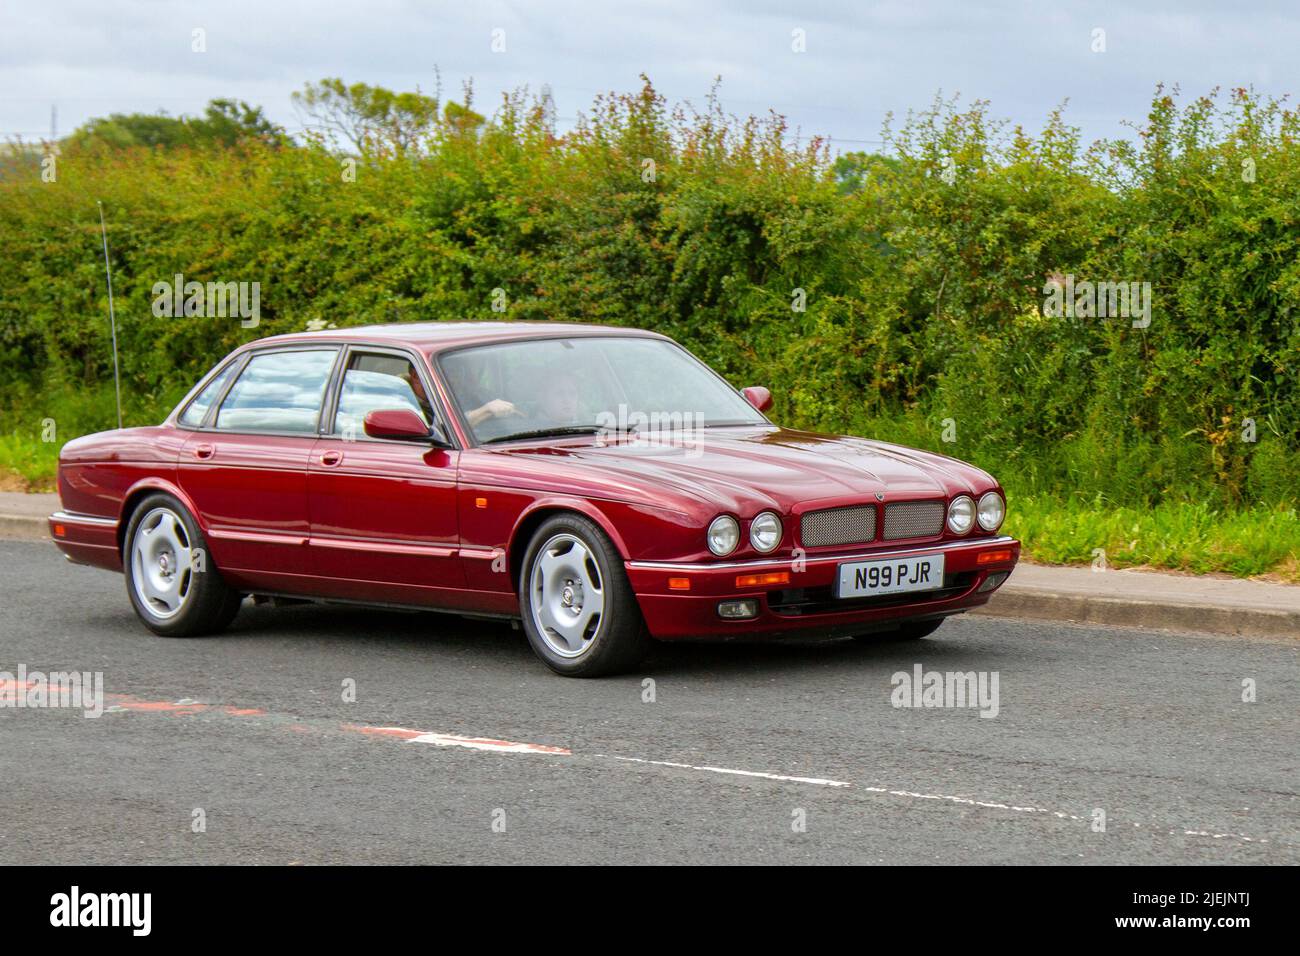 1996, 90s, nineties Red British Jaguar XJR Auto V6 S/C SWB 3980cc supercharged petrol saloon; en-route to Hoghton Tower for the Supercar Summer Showtime car meet which is organised by Great British Motor Shows in Preston, UK Stock Photo